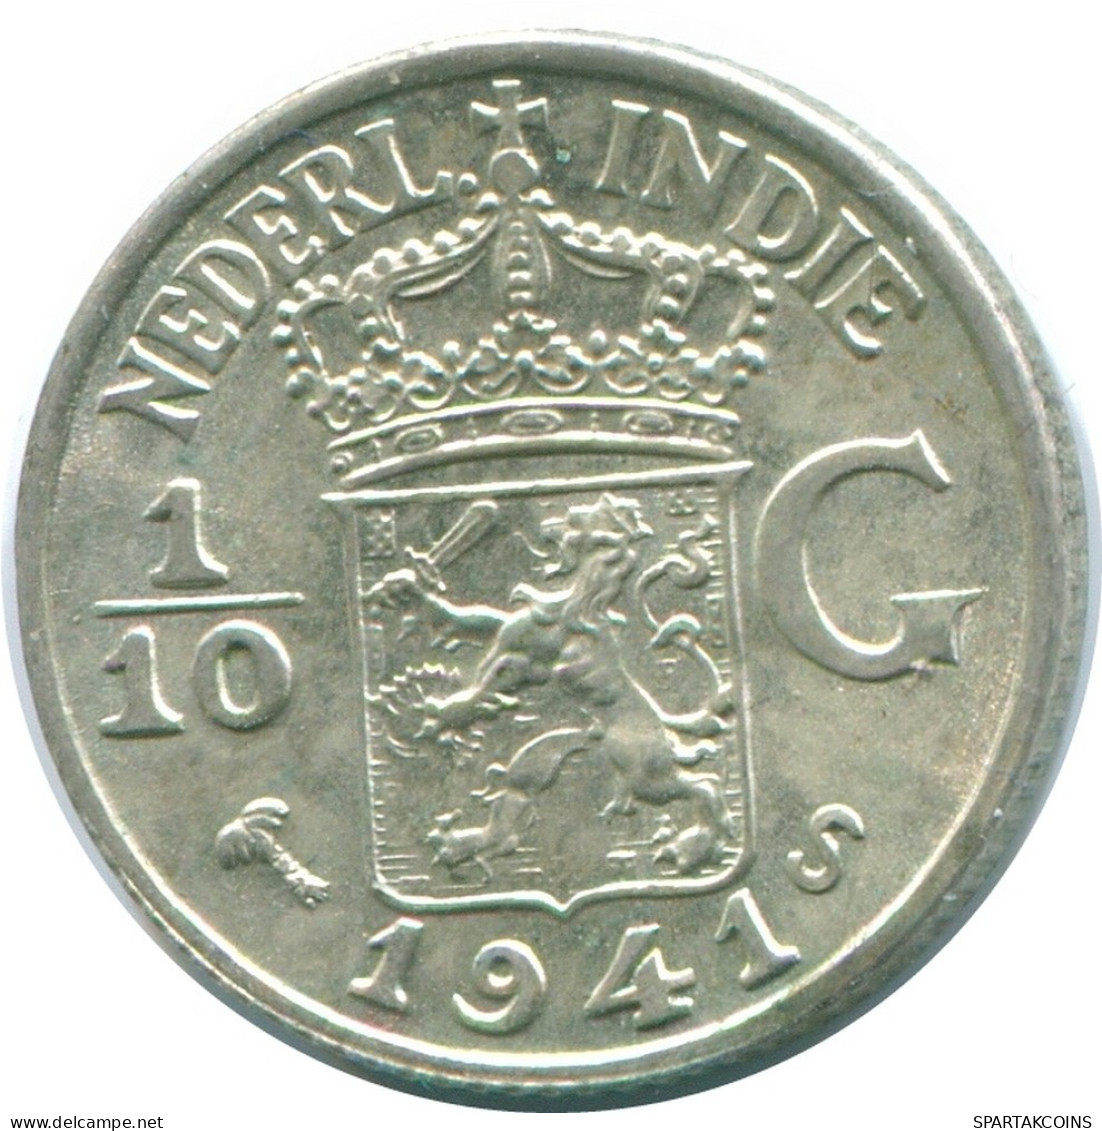 1/10 GULDEN 1941 S NETHERLANDS EAST INDIES SILVER Colonial Coin #NL13567.3.U.A - Dutch East Indies